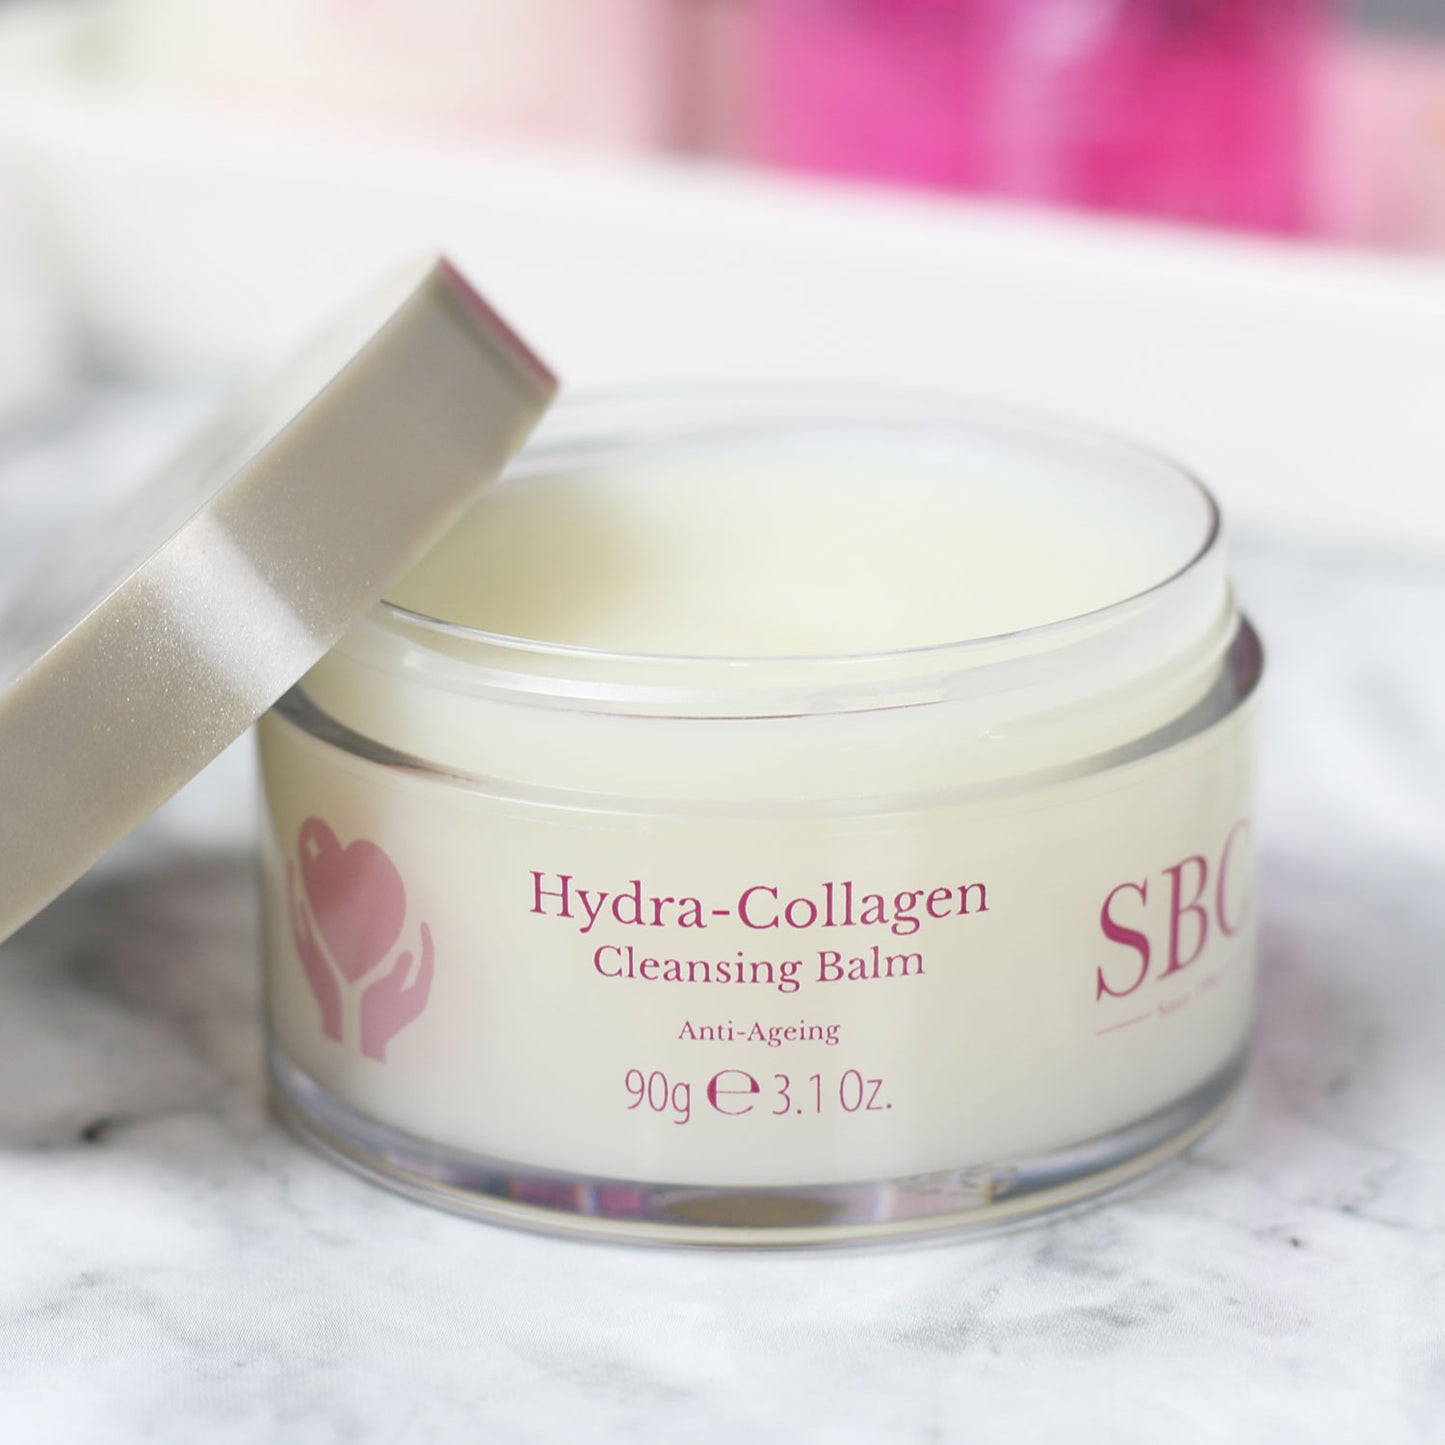 Hydra-Collagen Cleansing Balm with its cap off on a marble counter 